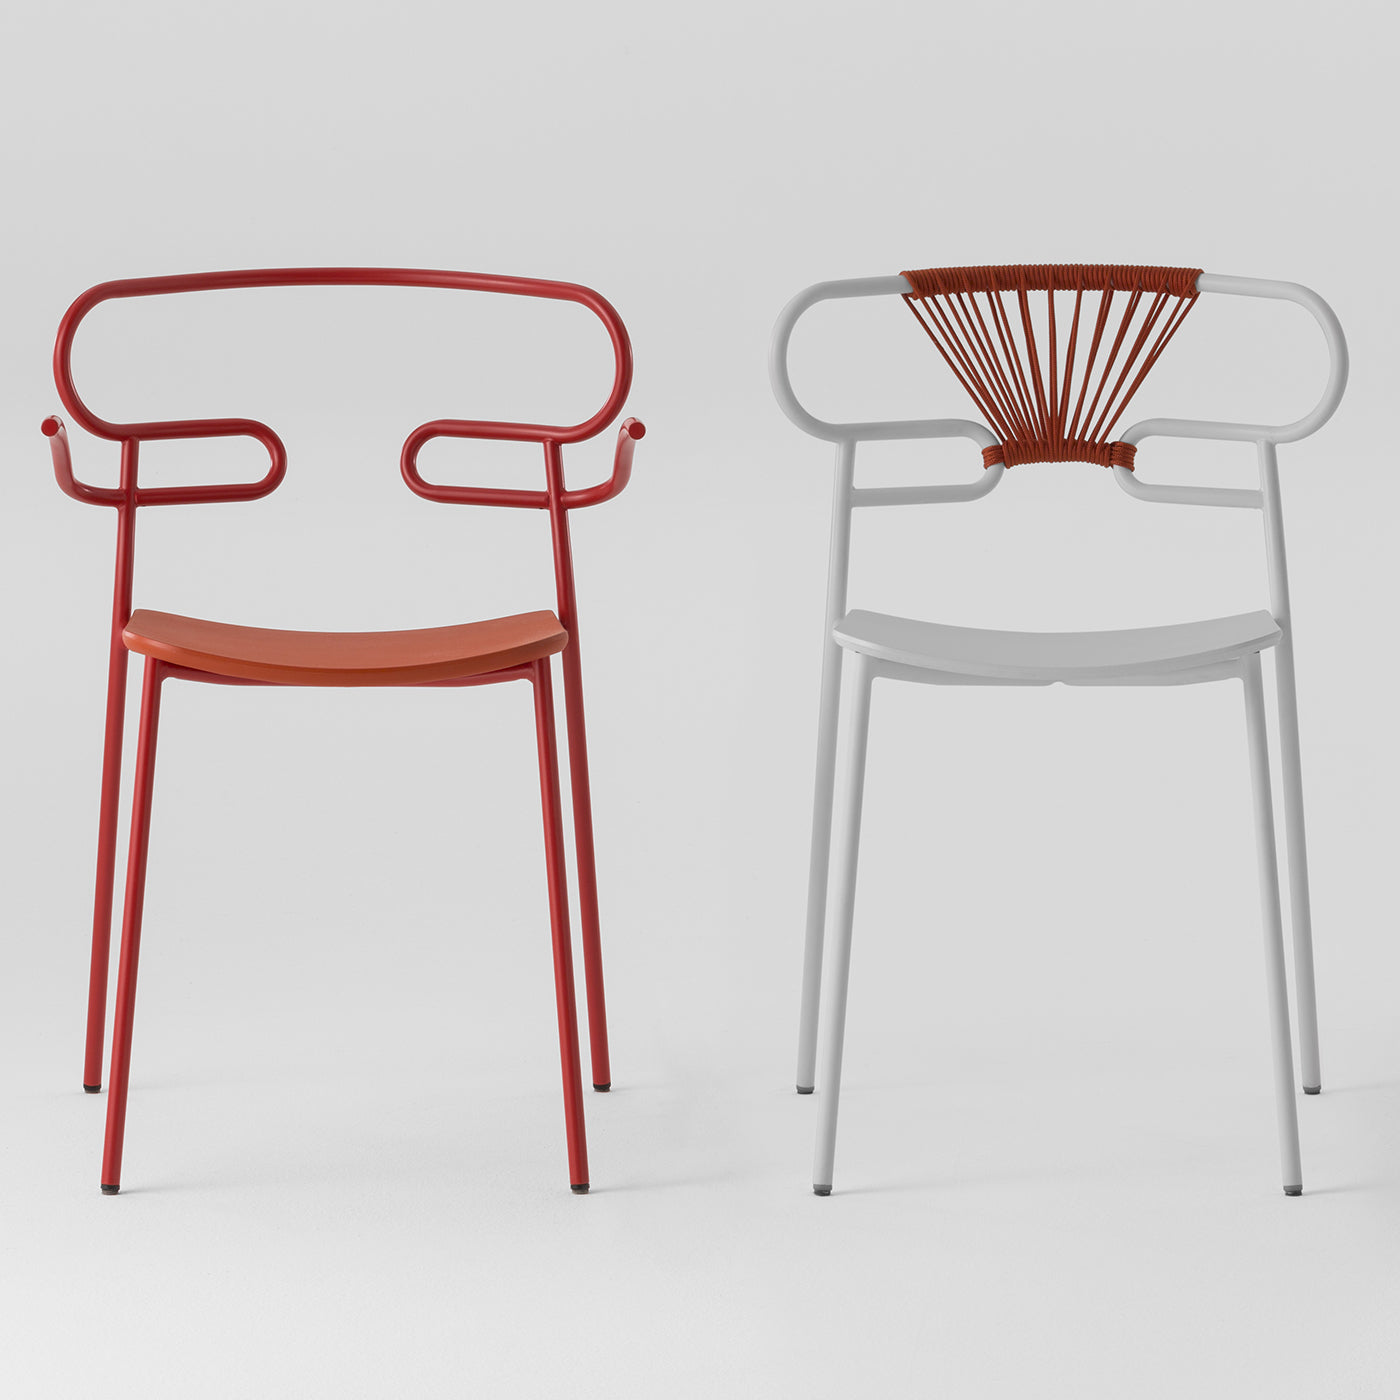 Genoa Red Armchair by Cesare Ehr - Alternative view 1